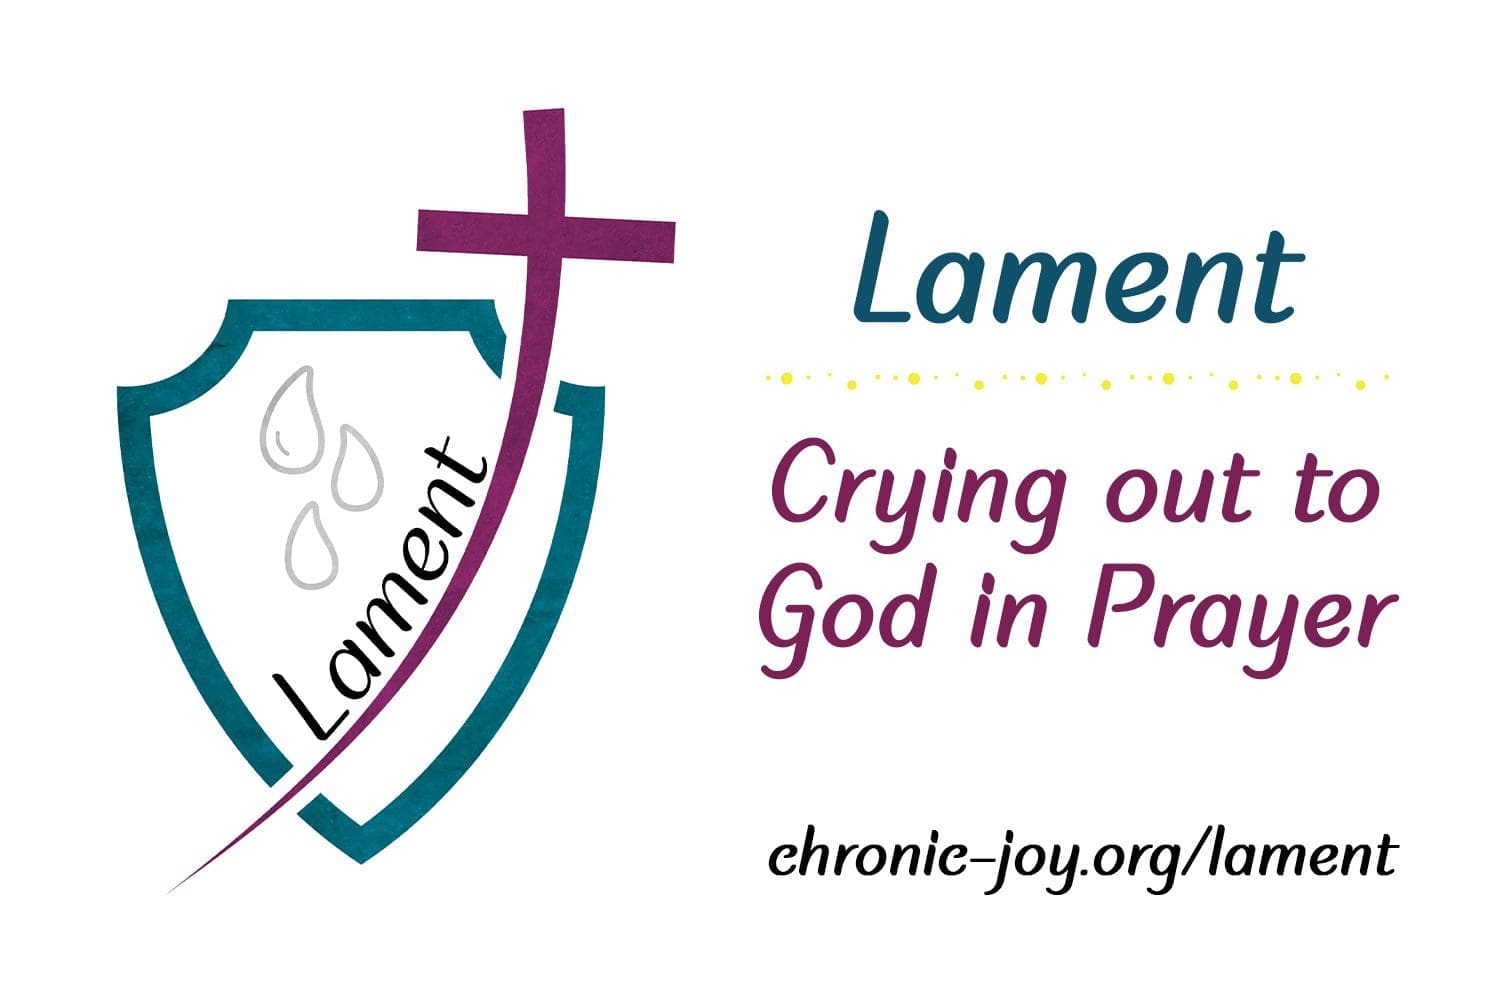 Lament - Crying out to God in Prayer